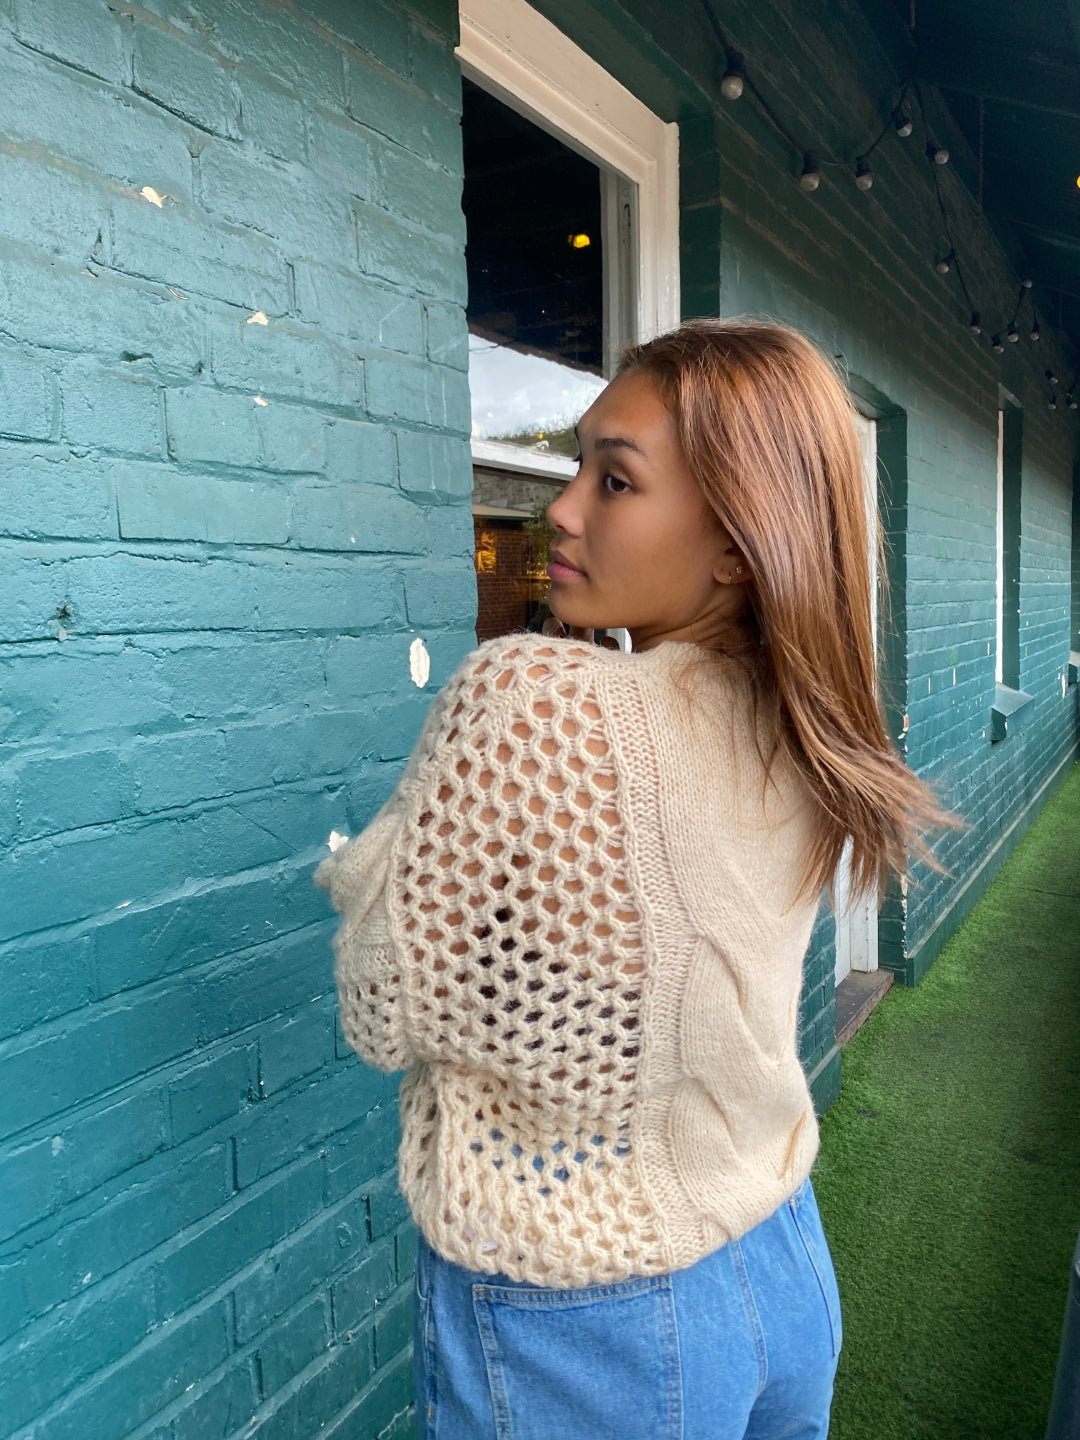 The Peachy Keen Knit from Peach and Parla